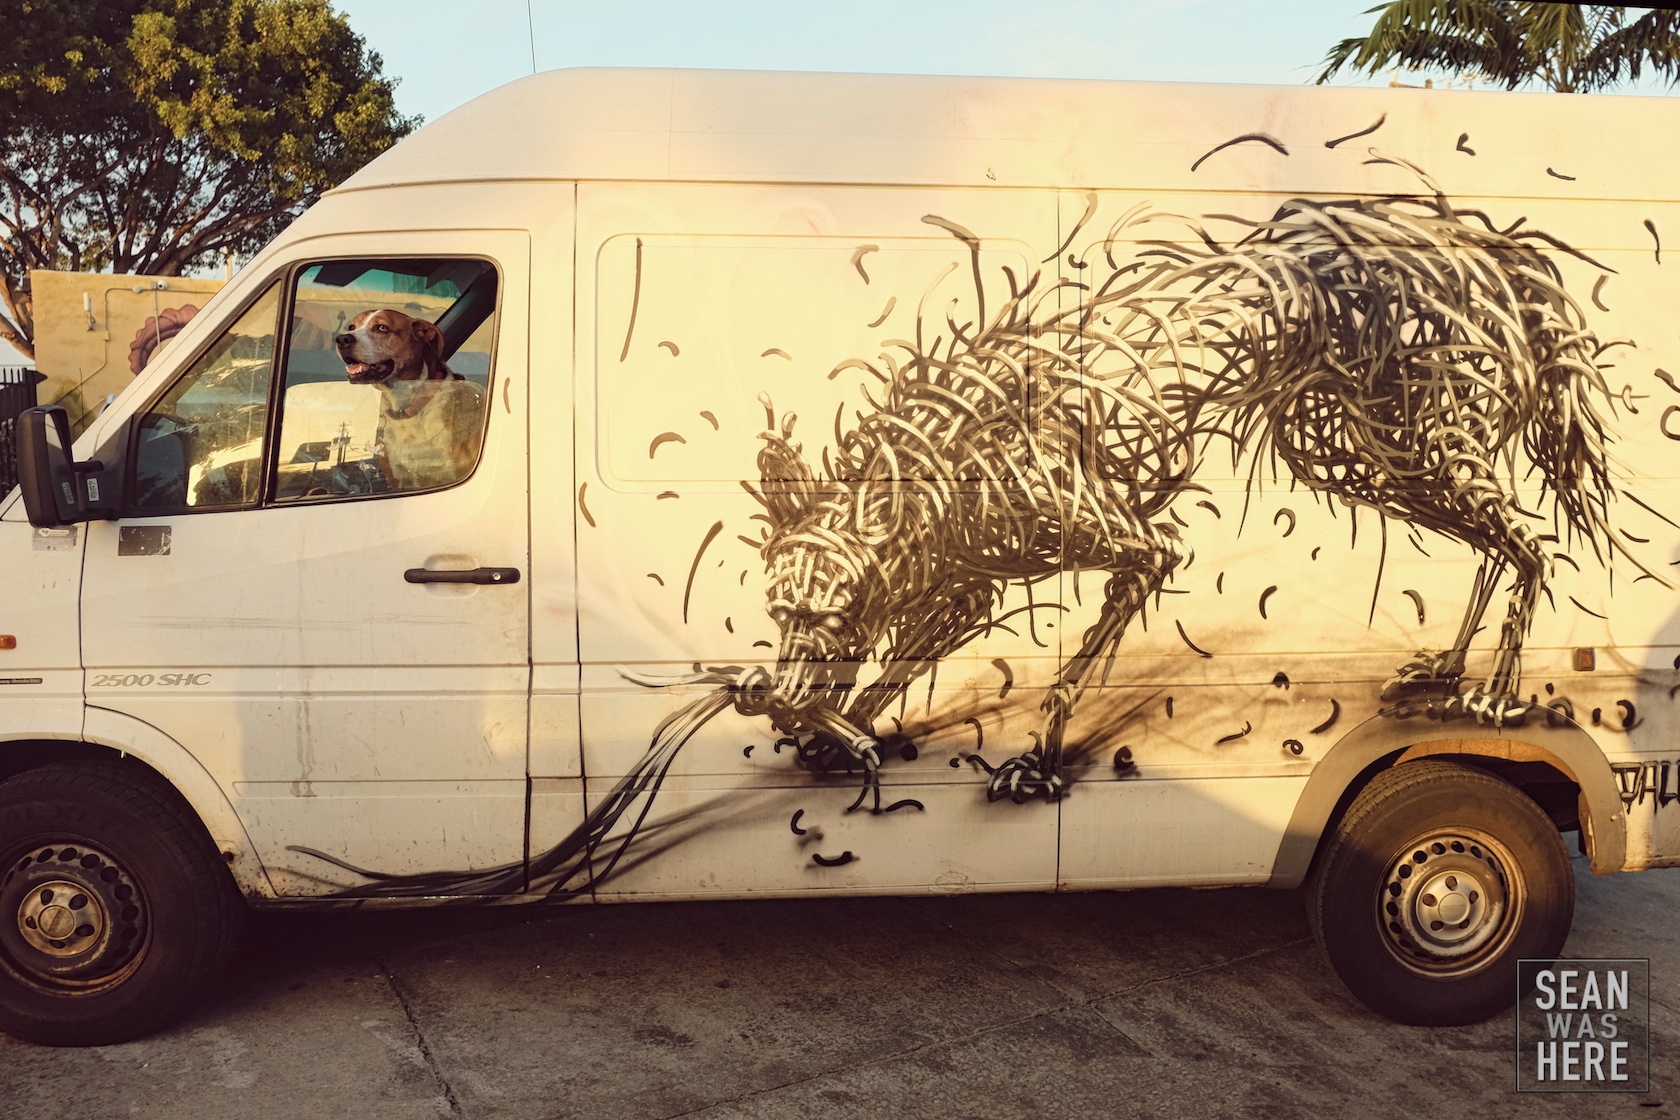 DALeast (left) painted this van in NYC over the summer. Todd (owner) drove down from NYC for art basel. Todd: "Yea I'm not sure how long I'll stay in town since I have a place here". Me: "Oh you live nearby??" Todd: "I live in this van!” Wynwood Miami